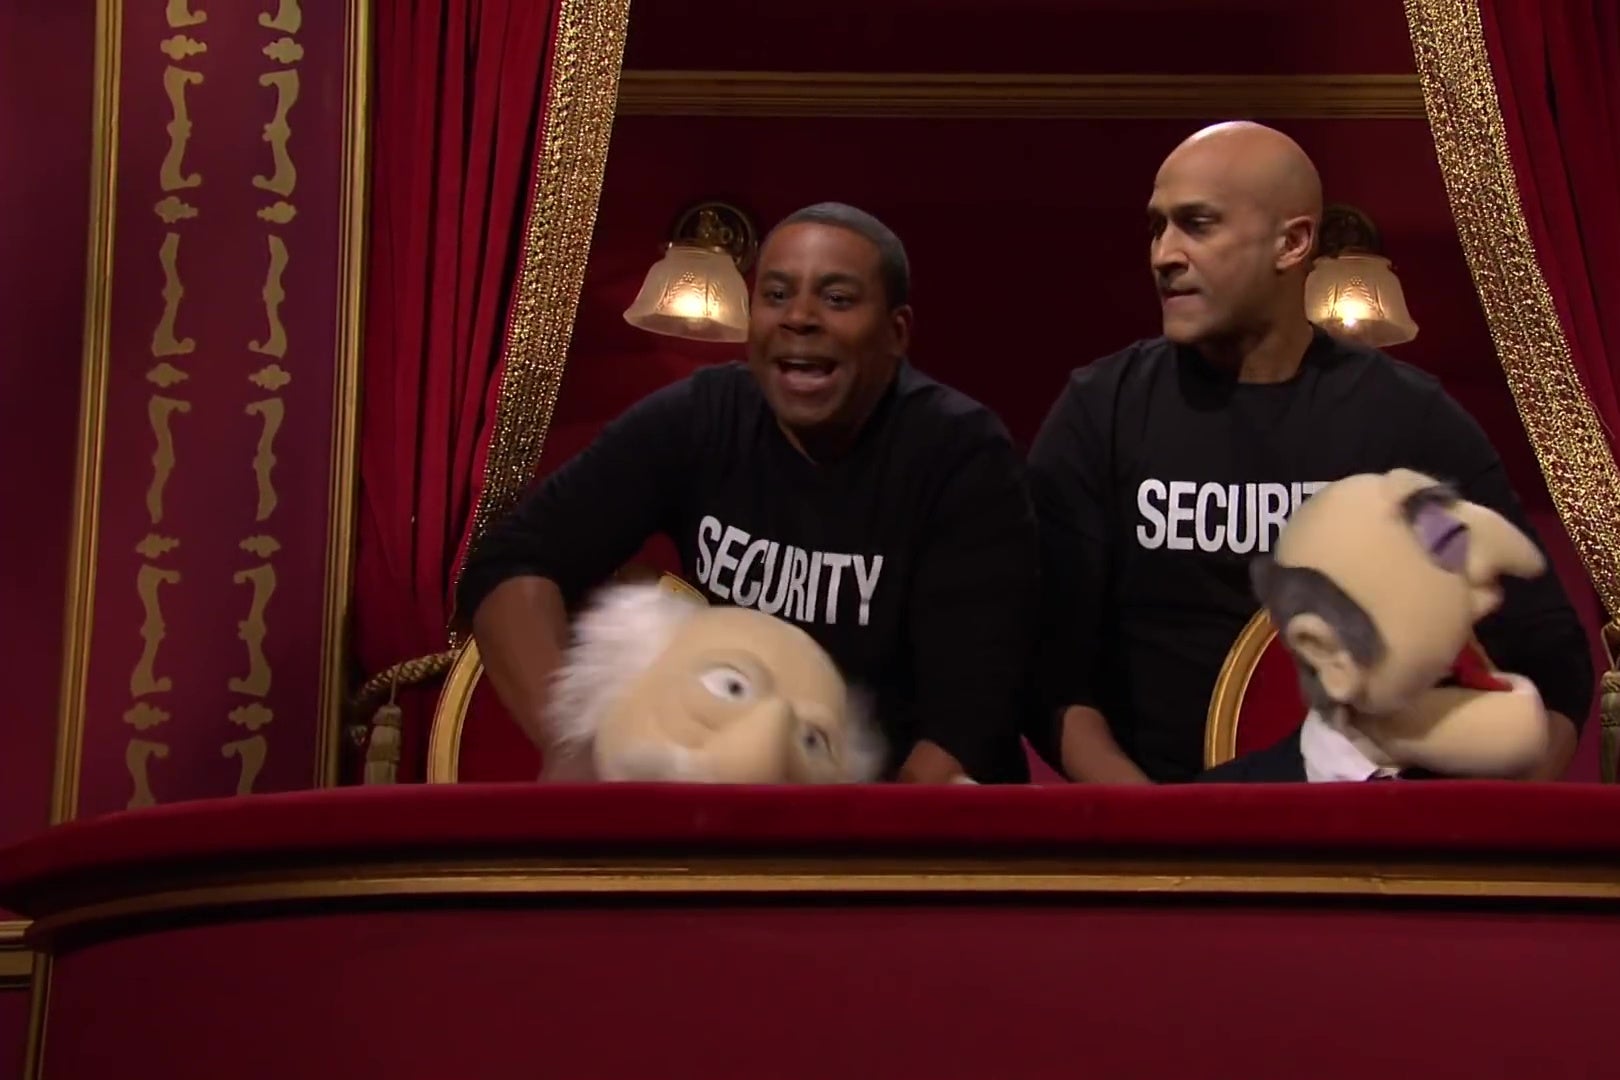 Kenan Thompson and Keegan Michael Key, wearing shirts reading SECURITY, stand behind Statler and Waldorf puppets, strangling them.